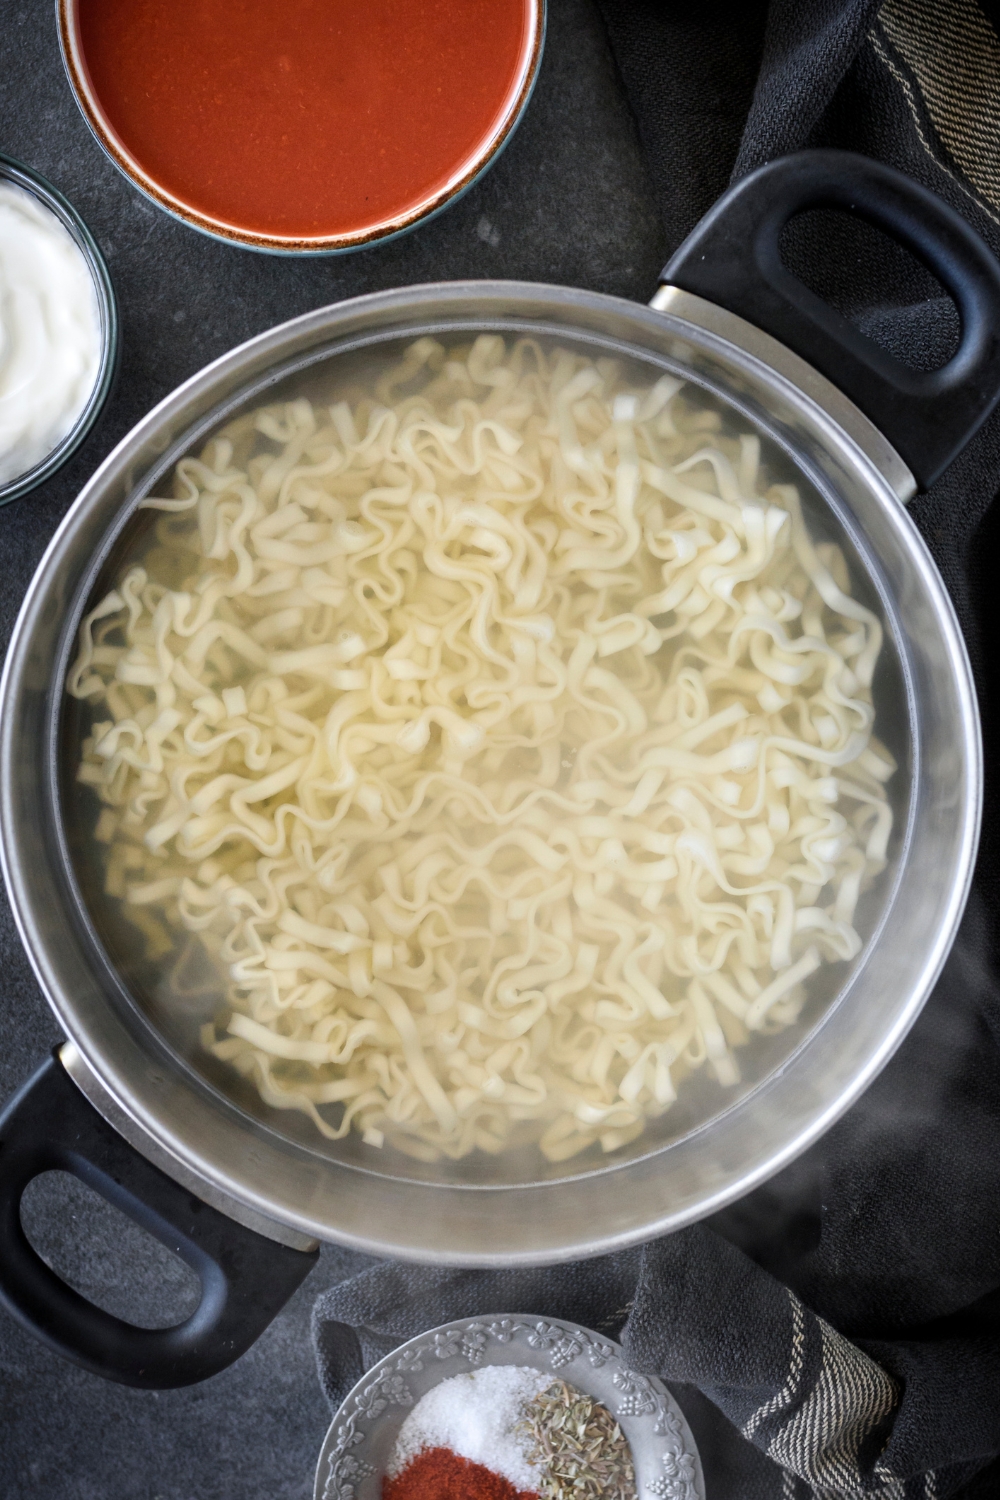 A large pot of water with noodles cooking in it.